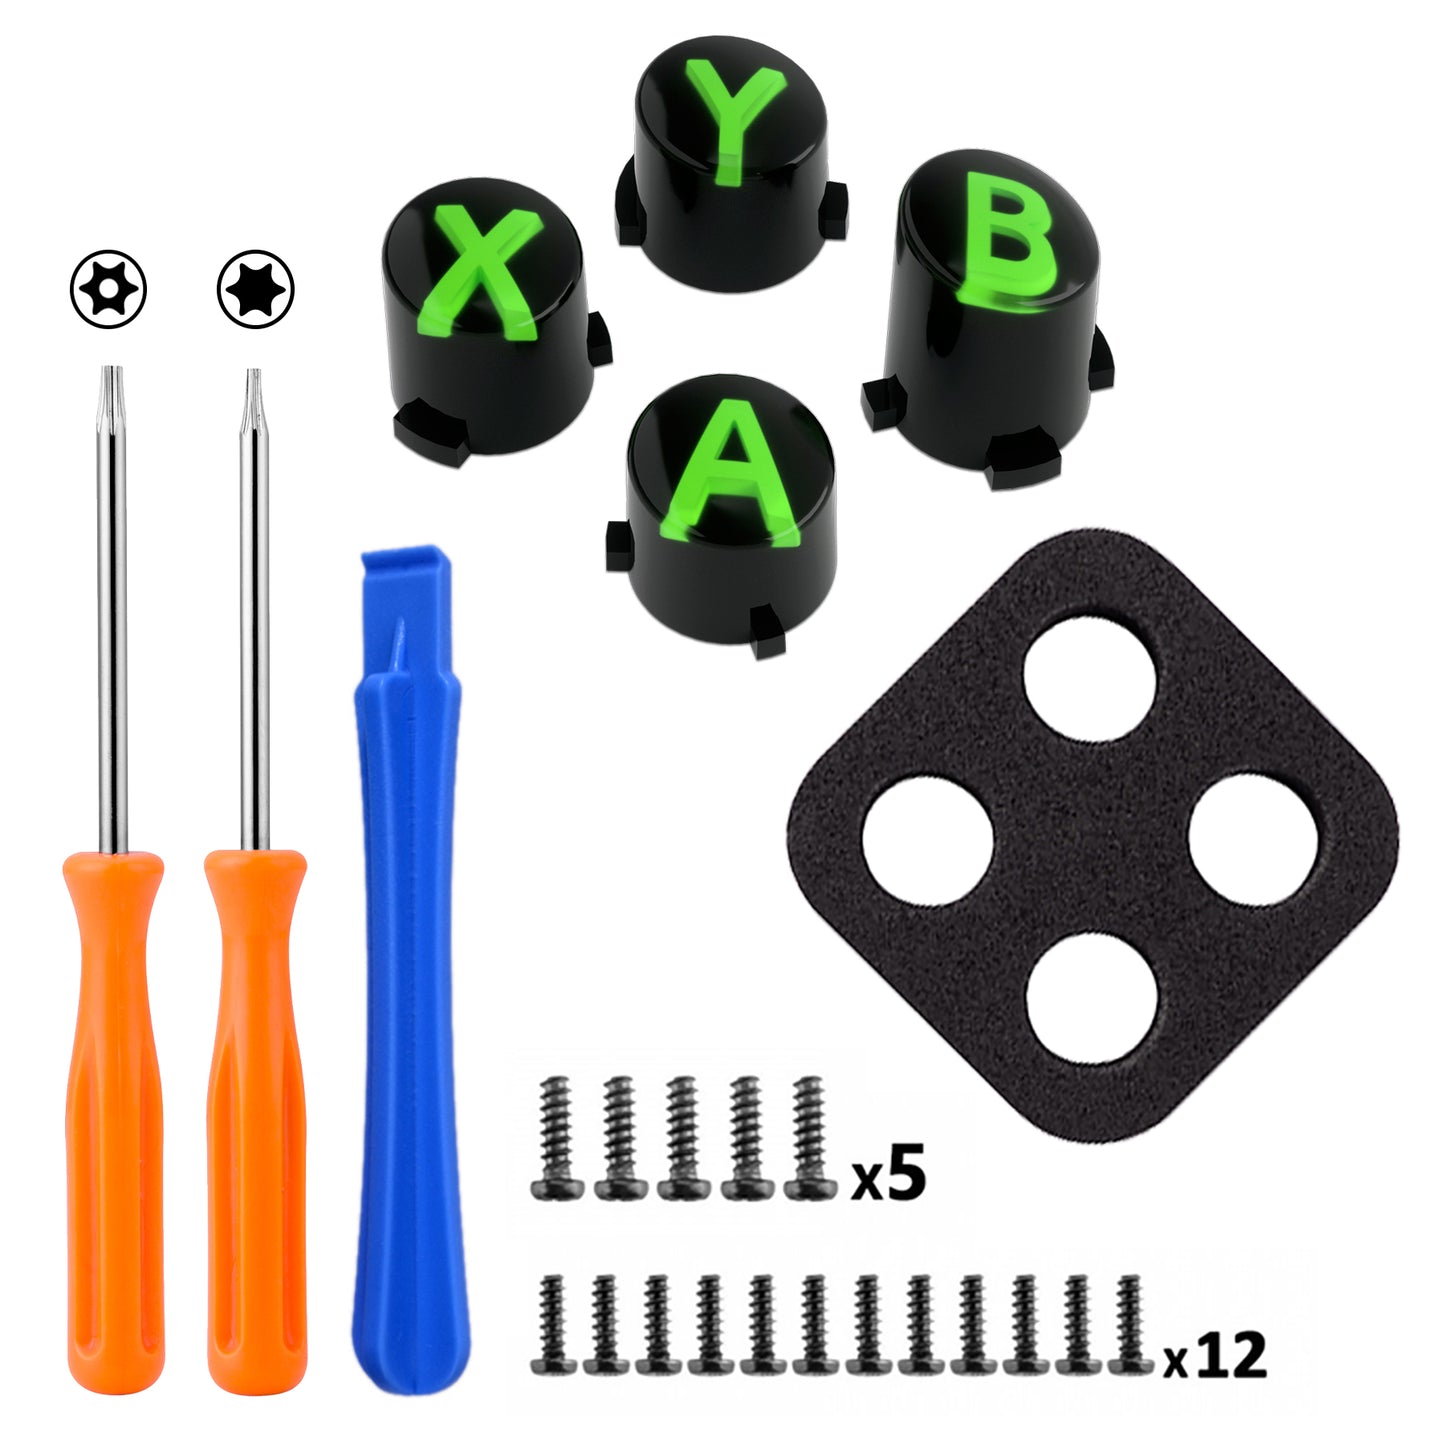 eXtremeRate Retail Three-Tone Black & Clear & Green ABXY Action Buttons with Classic Symbols for Xbox Series X & S Controller & Xbox One S/X & Xbox One Elite V1/V2 Controller - JDX3M005